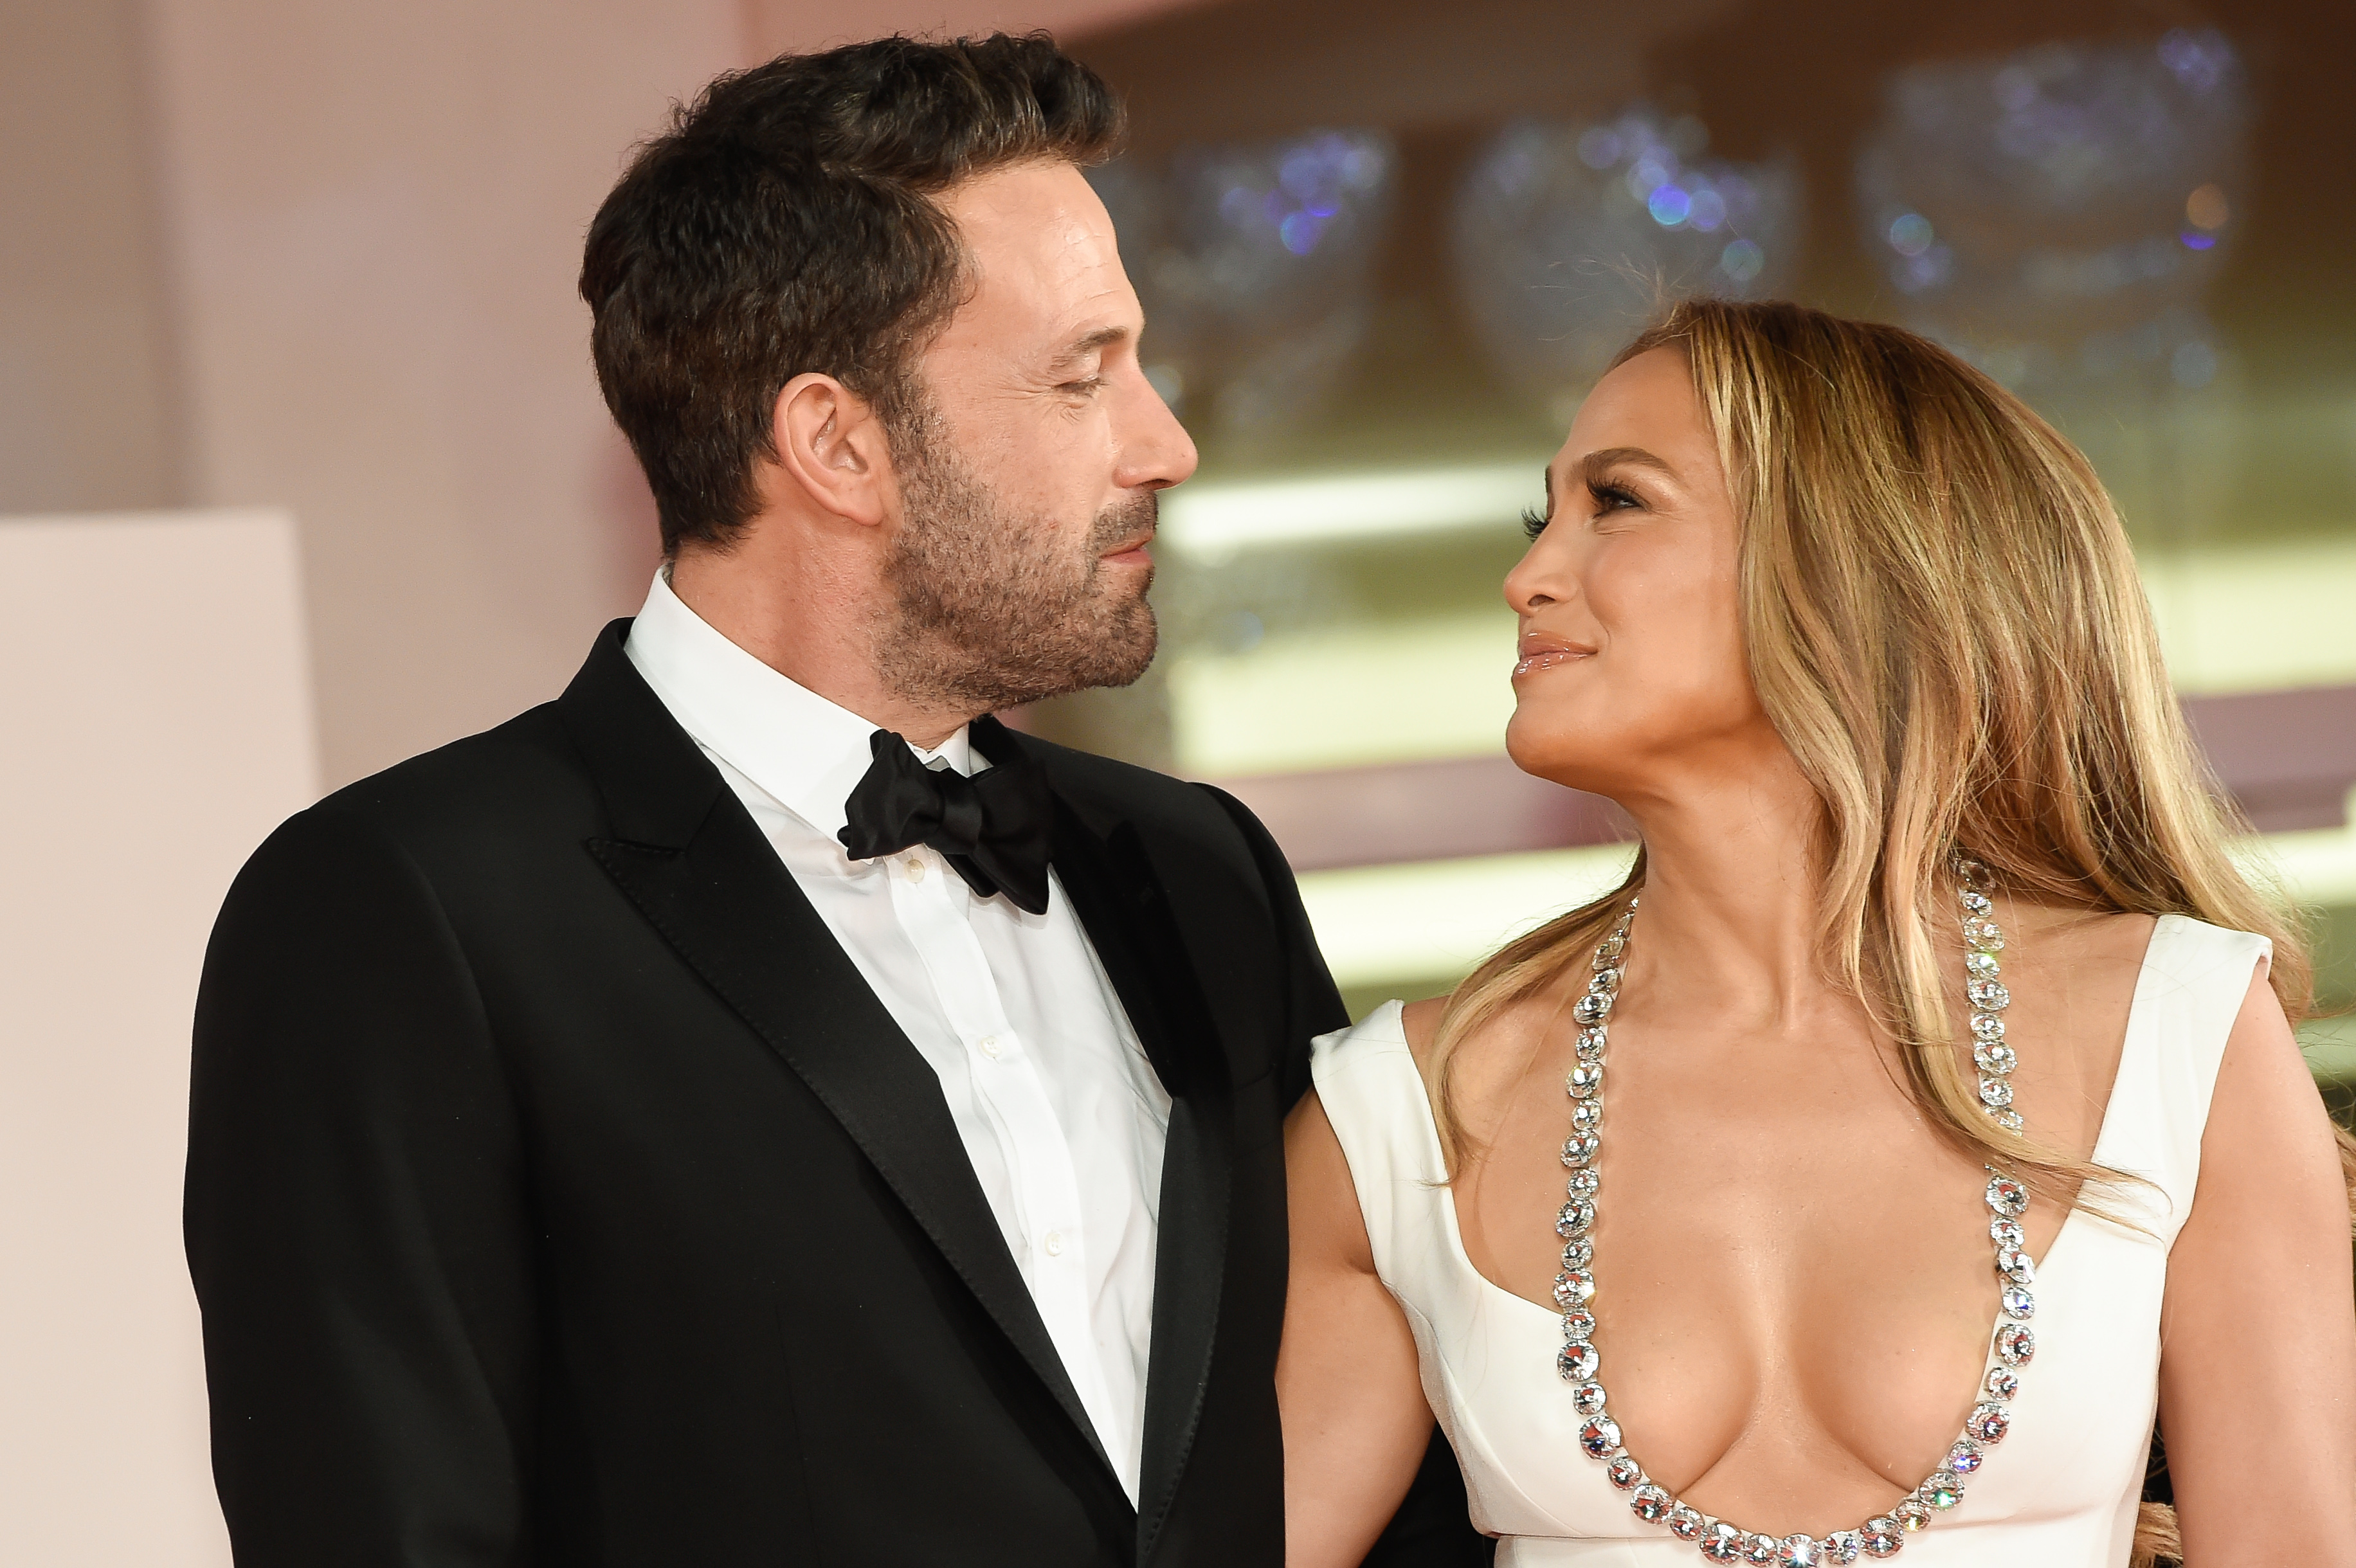 Ben Affleck in a tuxedo and Jennifer Lopez in a low-cut white dress with a sparkling necklace, smiling at each other on a formal red carpet event